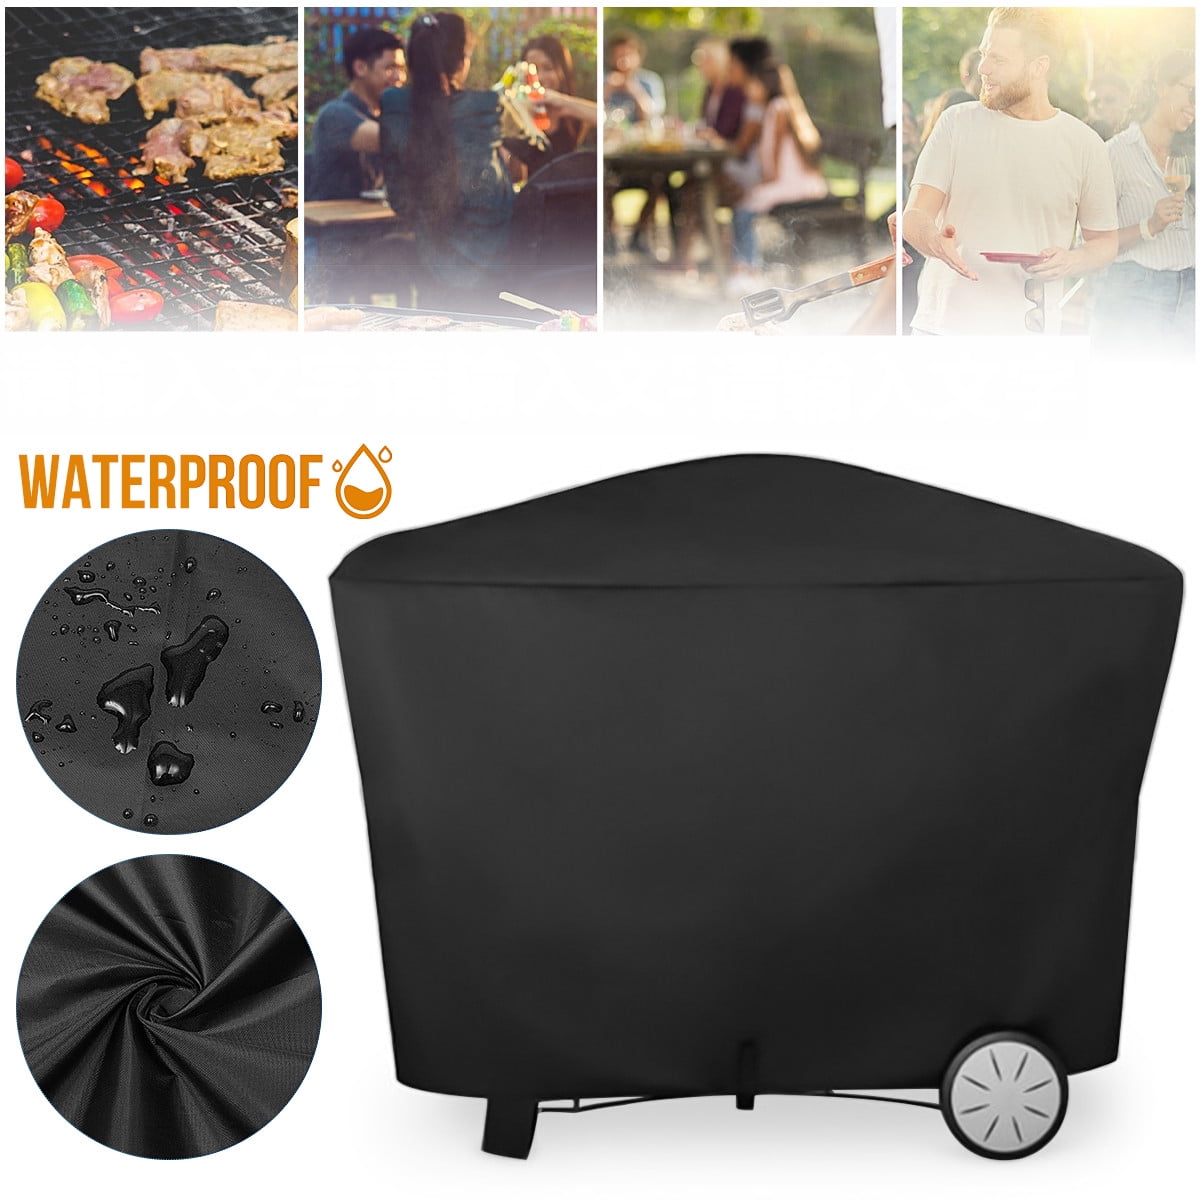 Waterproof BBQ Gas Grill Cover Barbecue Outdoor Patio Garden Protection 57" Inch 